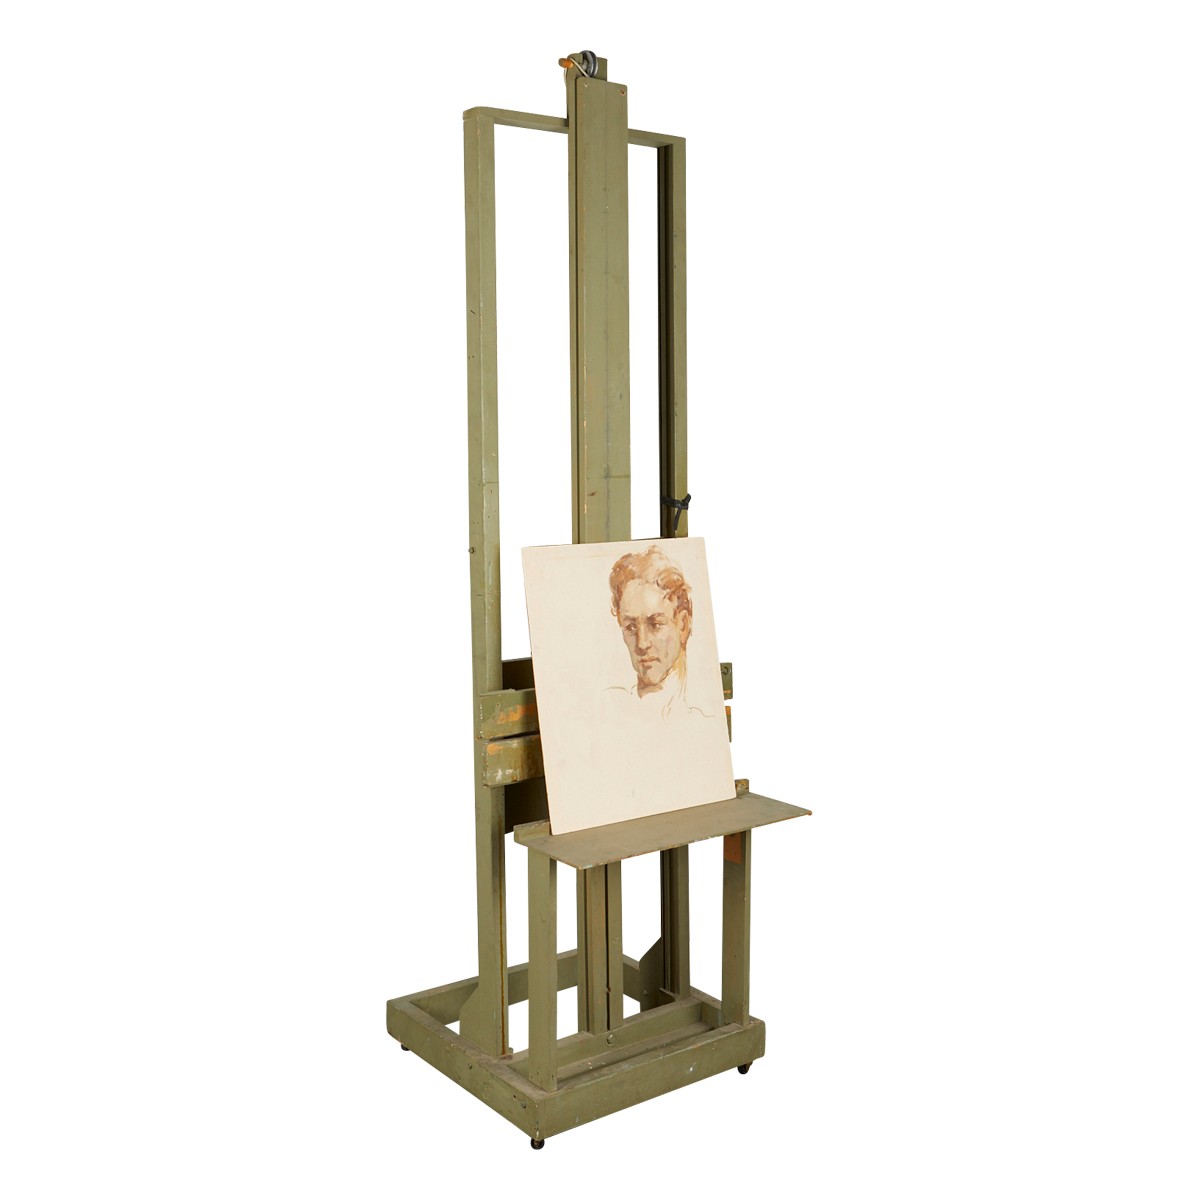 Charles Rubino Unfinished Portrait and Easel